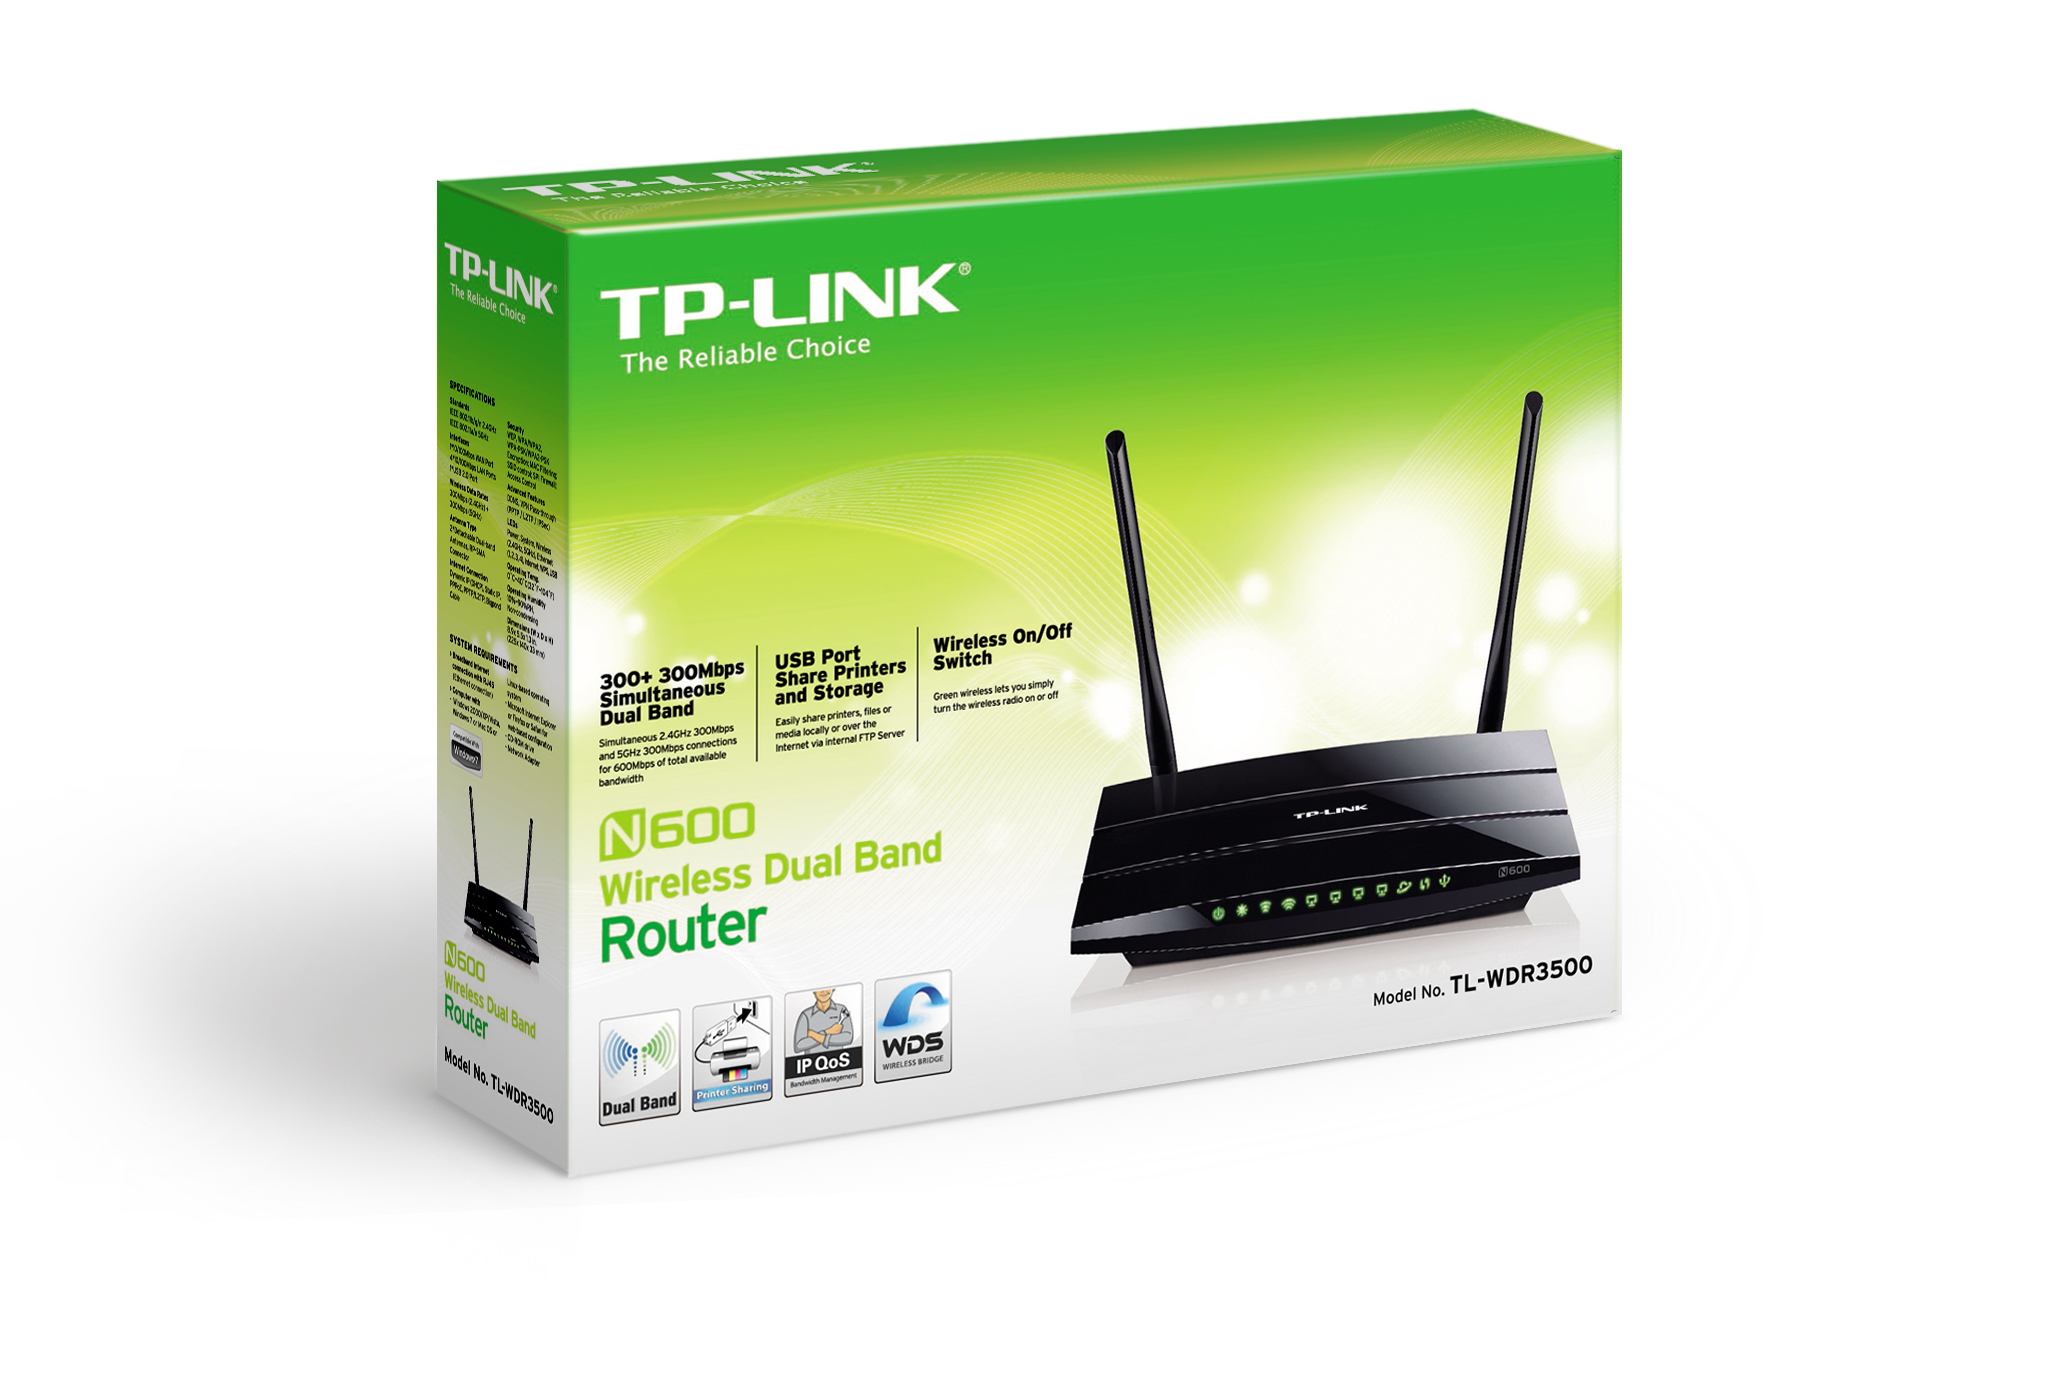 TL-WDR3500 N600 Wireless Dual Band Router